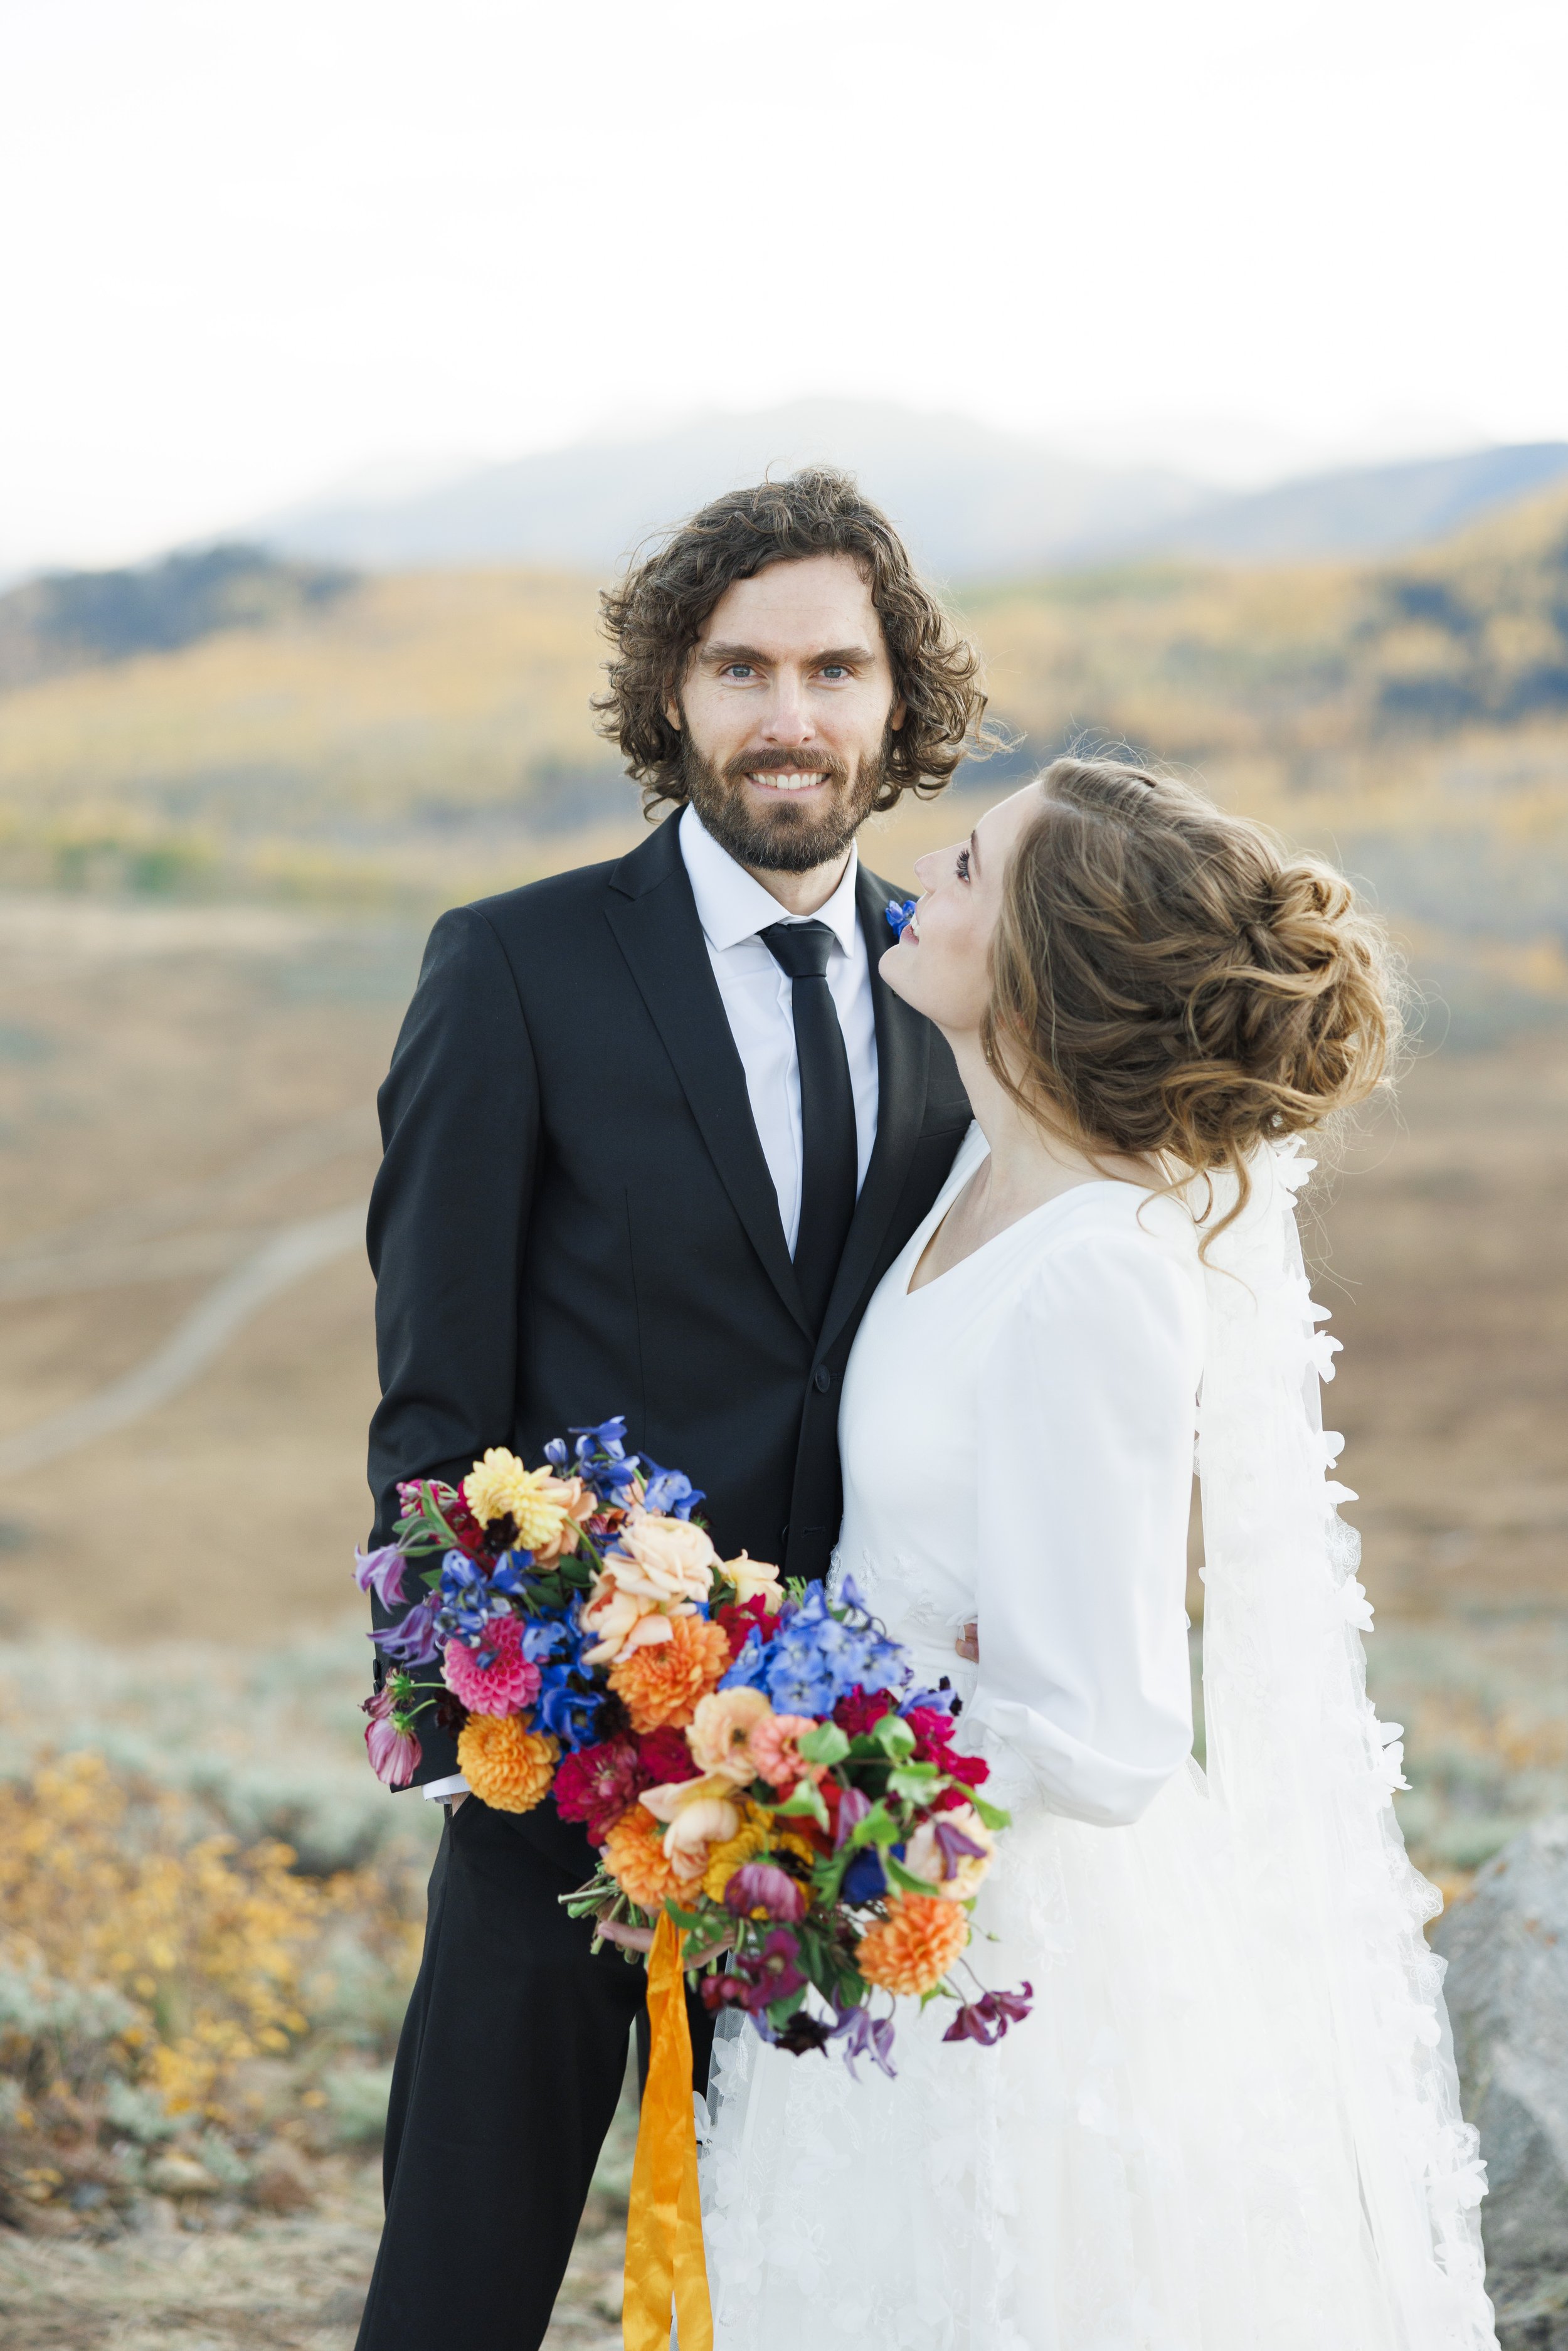  A portrait of a groom in a black suit with his bride holding onto him by Savanna Richardson Photography. classy wedding formals #SavannaRichardsonPhotography #SavannaRichardsonFormals #CottonwoodCanyon #WeddingFormals #SLCWedding #fallwed 